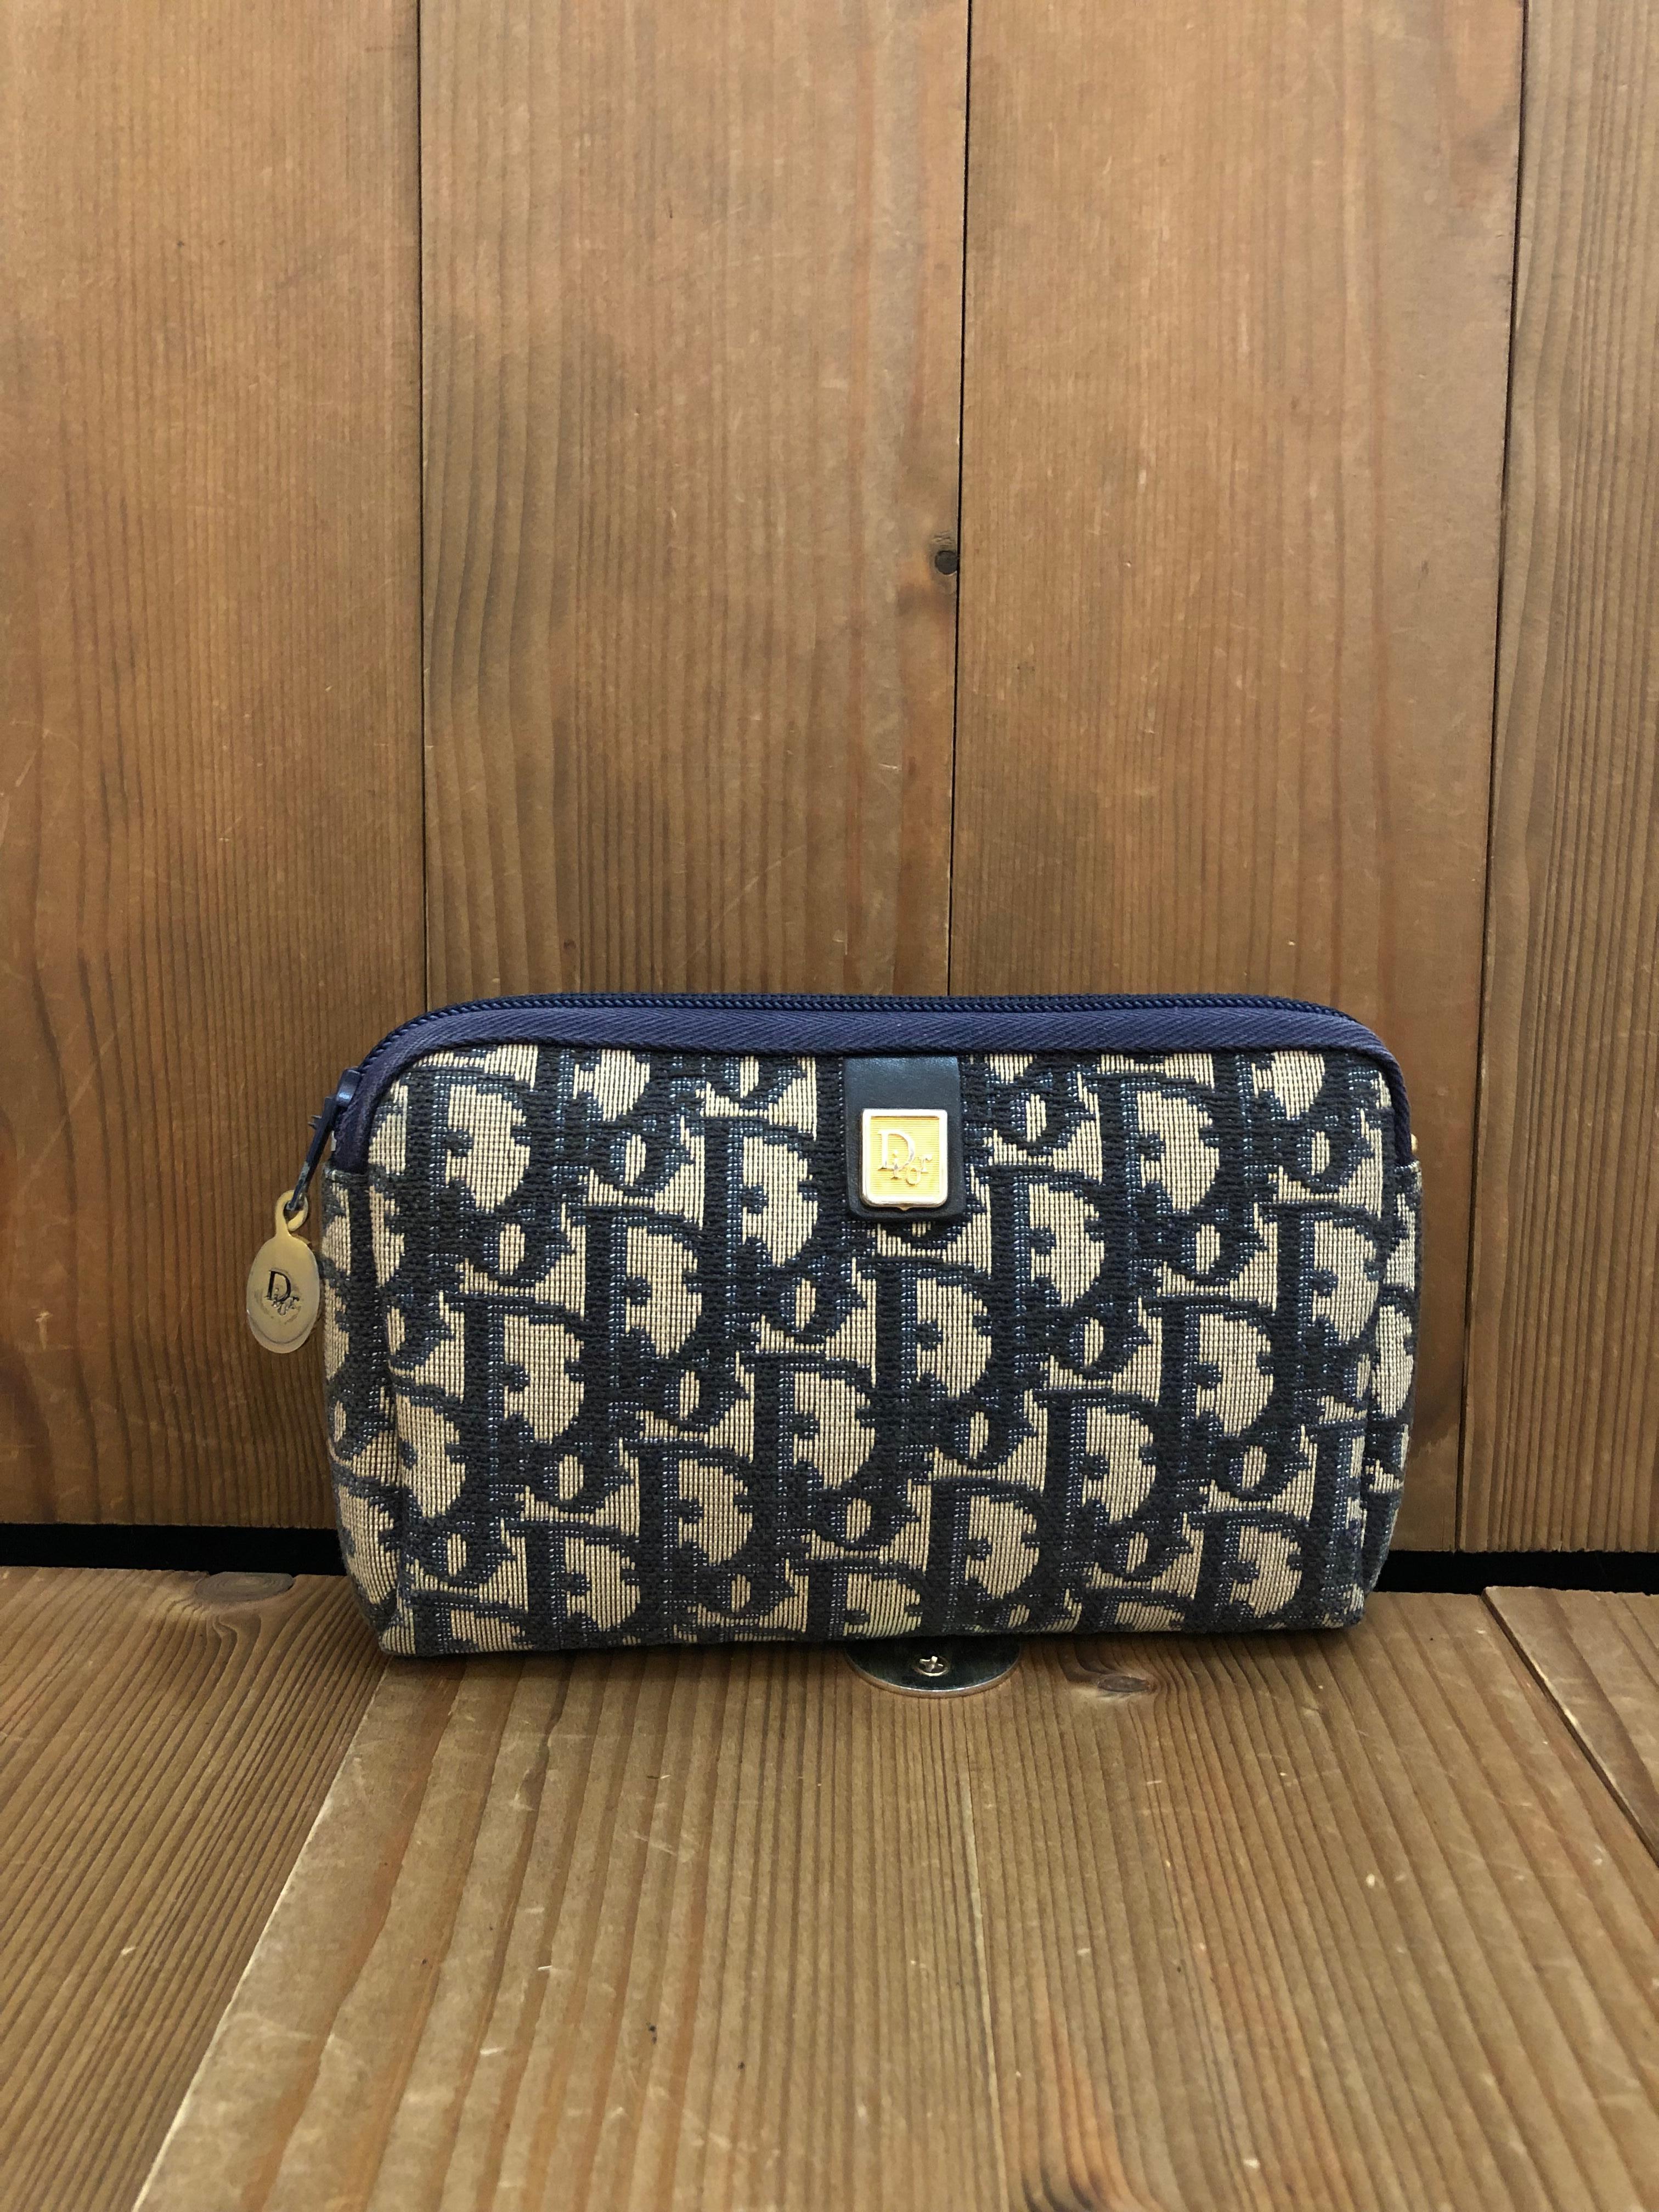 This Vintage CHRISTIAN DIOR mini vanity pouch is crafted of Dior signature Trotter jacquard in navy featuring gold toned hardware. Top zipper closure opens to a coated interior in navy. Made in France. Measures approximately 6.25 x 4 x 1.5 inches.